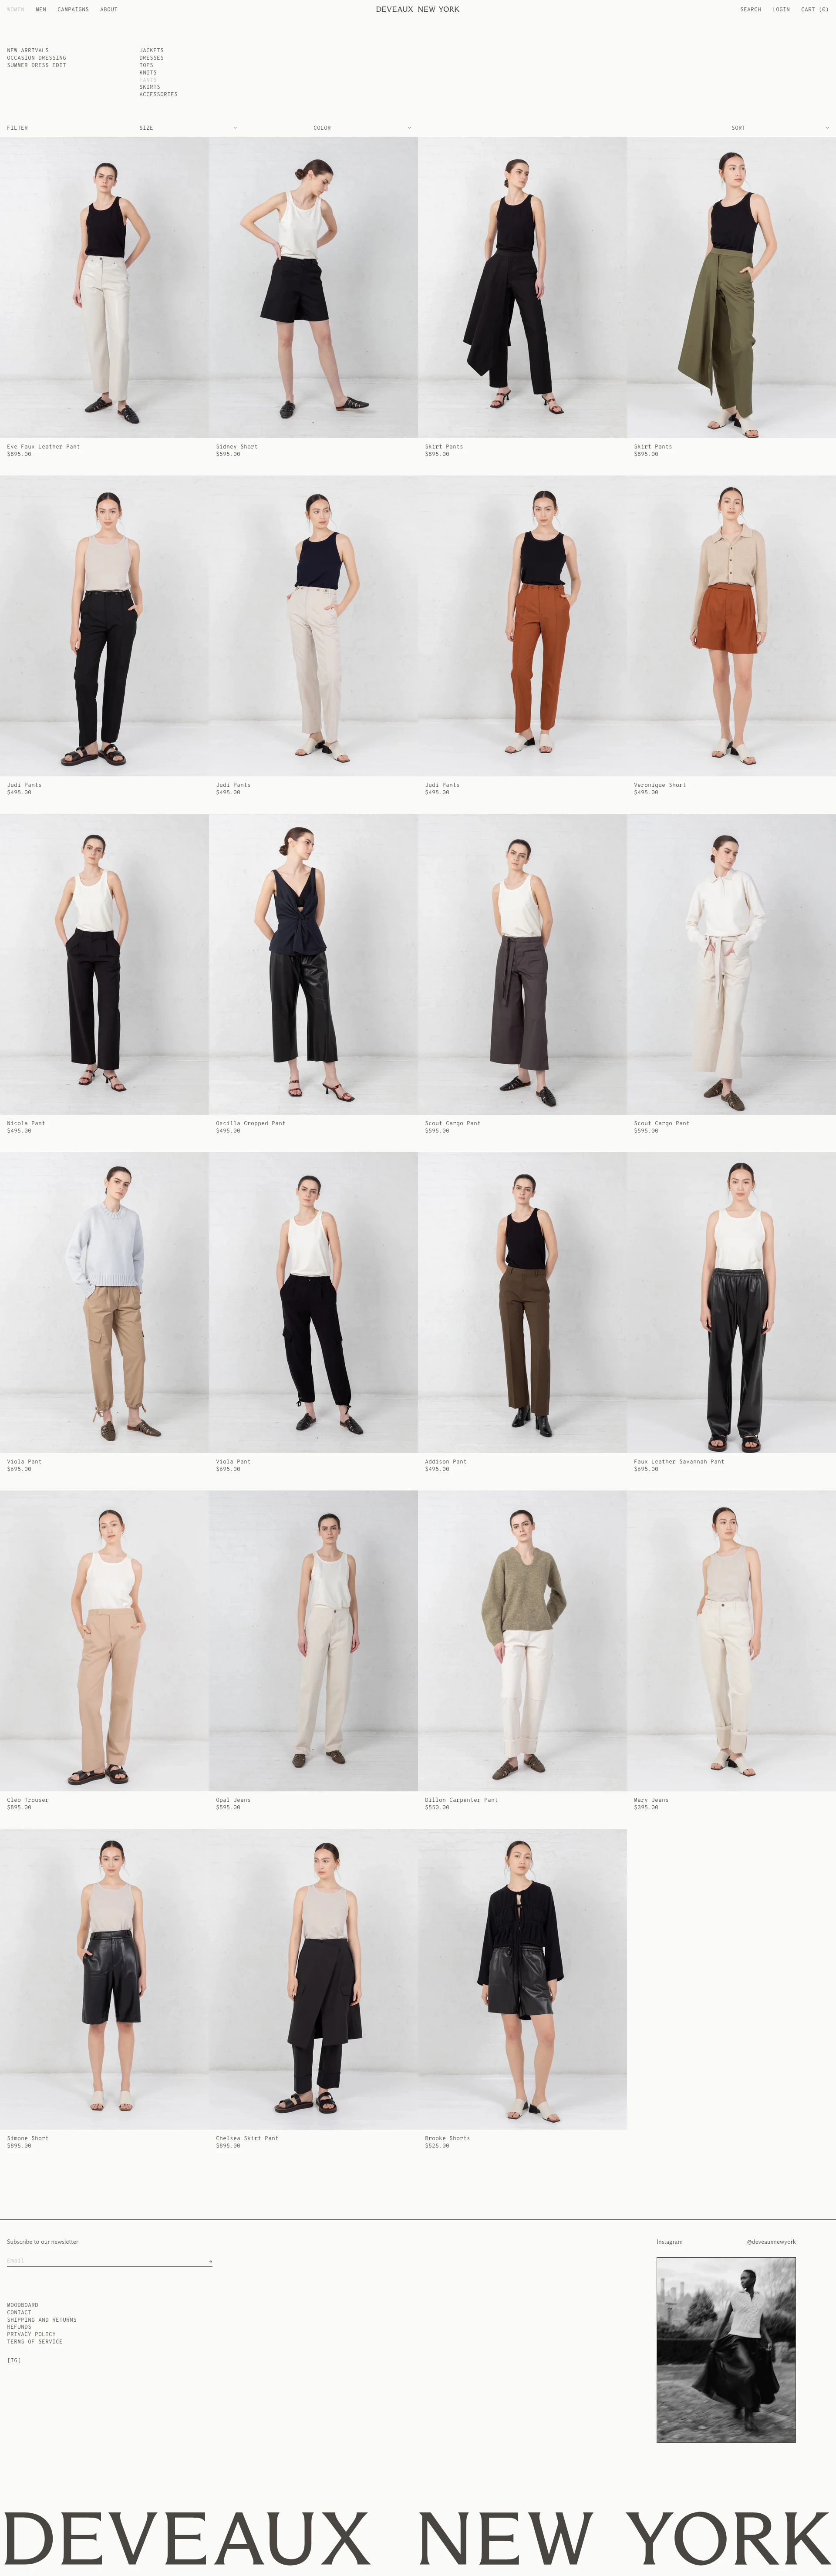 Deveaux New York Landing Page Example: Deveaux is a ready-to-wear collection based in New York City. The brand creates utilitarian staples with sensible and timeless construction. Shop ready-to-wear and accessories collections for men and women.